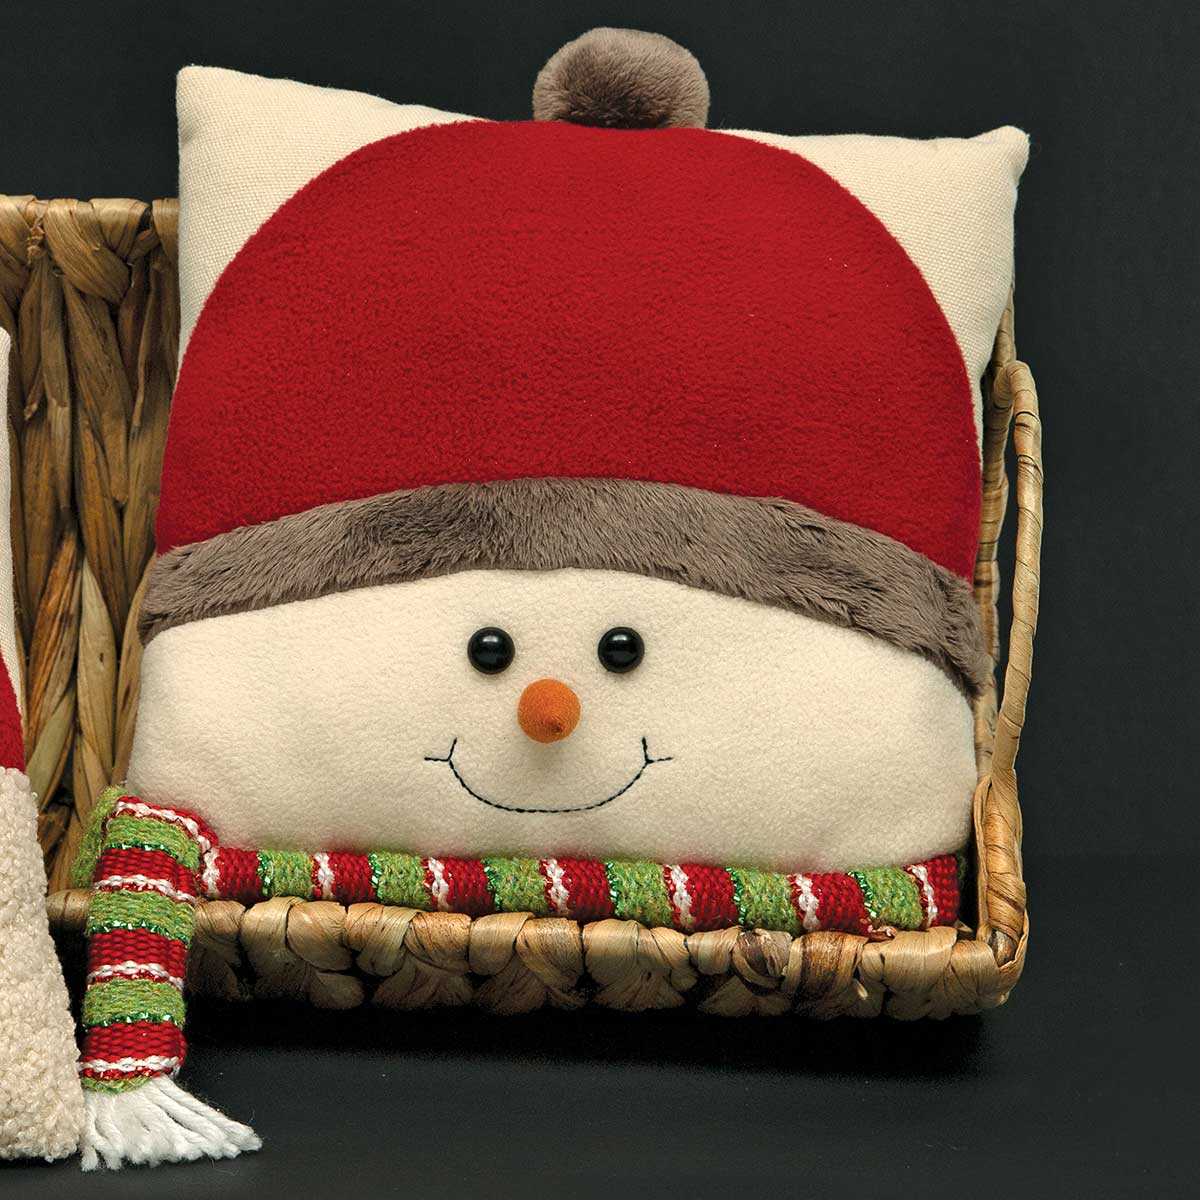 SNOWMAN FACE PILLOW CREAM/RED/GREEN WITH POM-POM - Click Image to Close